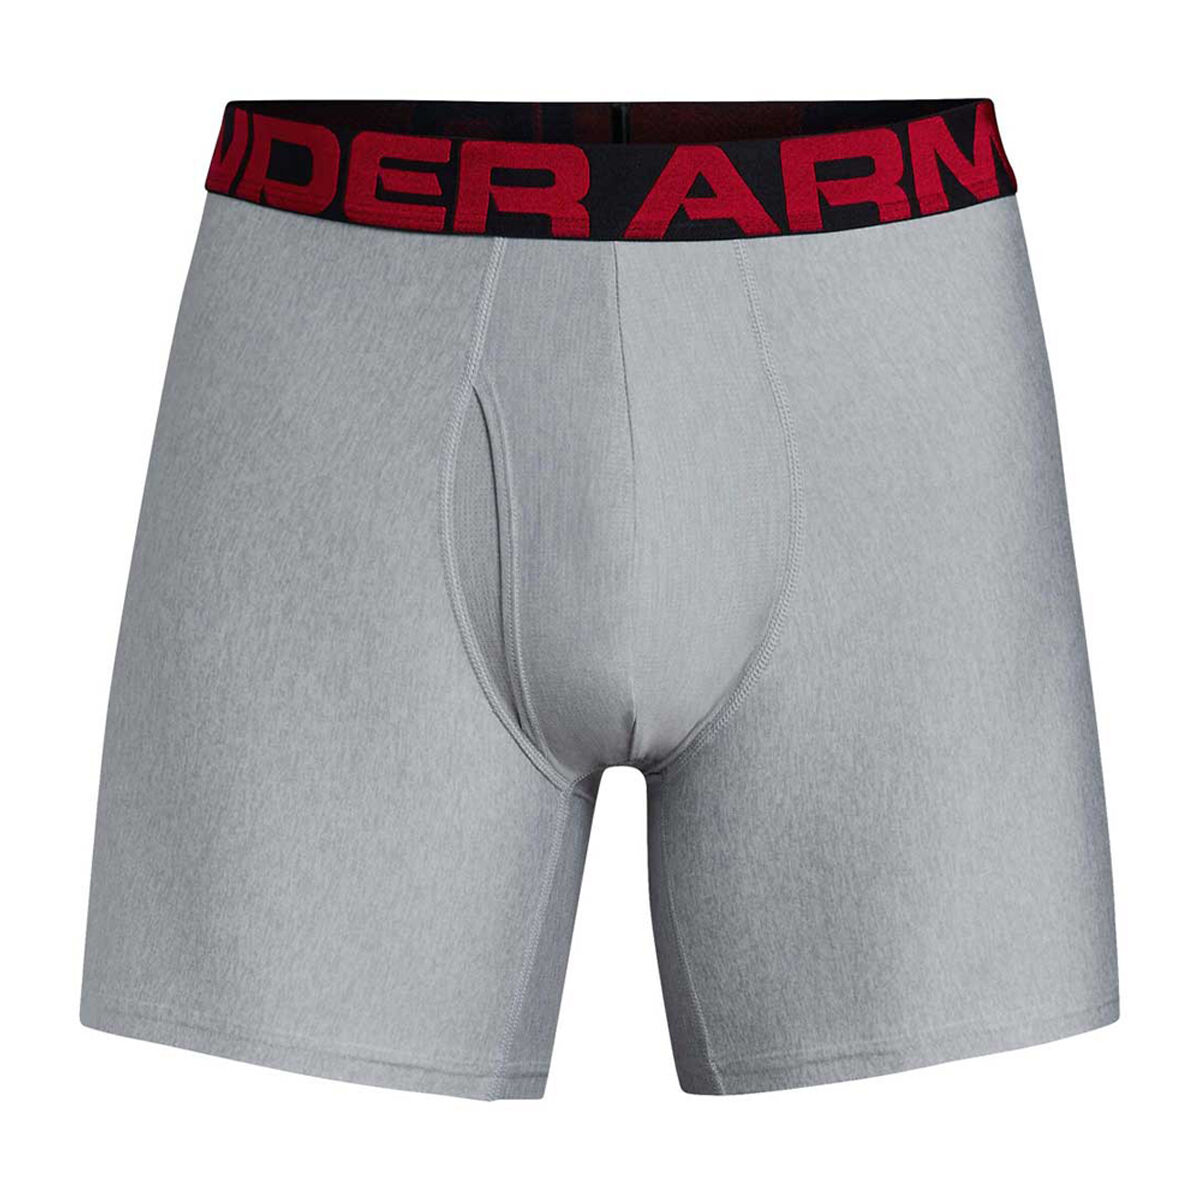 Under Armour Mens Tech 6in 2 Pack 